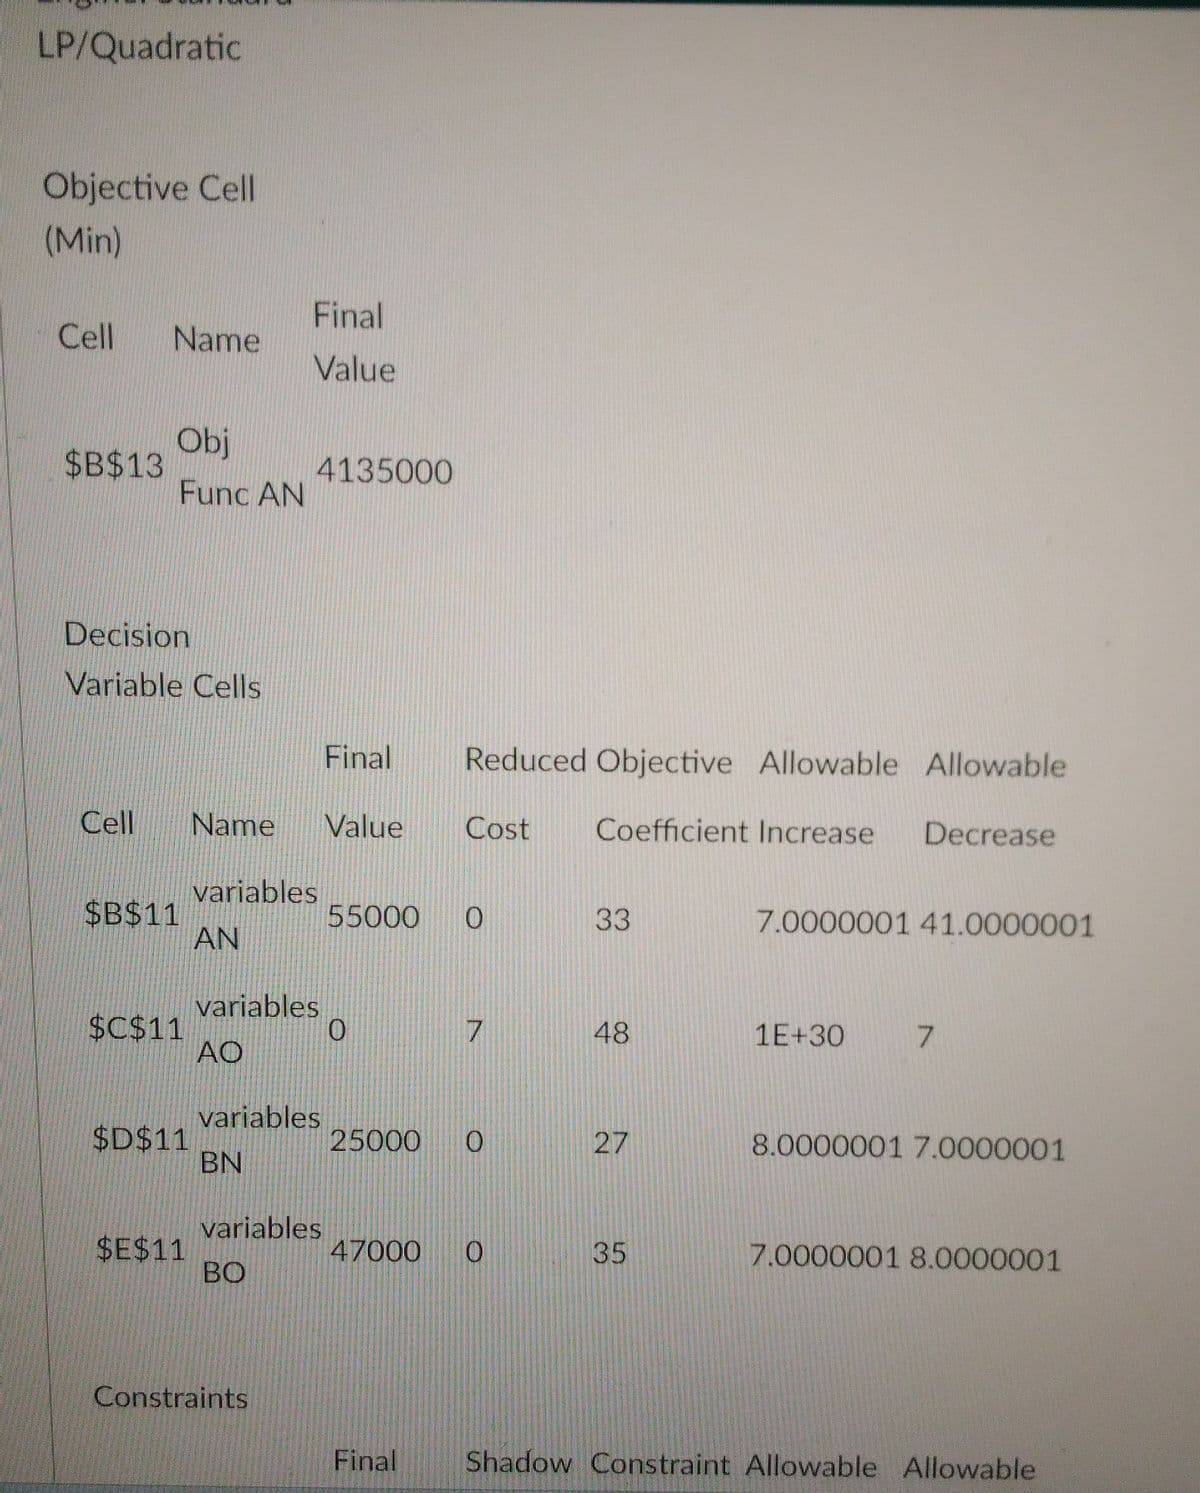 LP/Quadratic
Objective Cell
(Min)
Final
Cell
Name
Value
Obj
$B$13
4135000
Func AN
Decision
Variable Cells
Final
Reduced Objective Allowable Allowable
Cell Name Value Cost
Coefficient Increase Decrease
$B$11
variables
AN
55000 0
33
7.0000001 41.0000001
variables
$C$11
0
7
48
1E+30
7
AO
$D$11
variables
BN
25000 0
27
8.0000001 7.0000001
$E$11
variables
BO
47000 0
35
7.0000001 8.0000001
Constraints
Final
Shadow Constraint Allowable Allowable